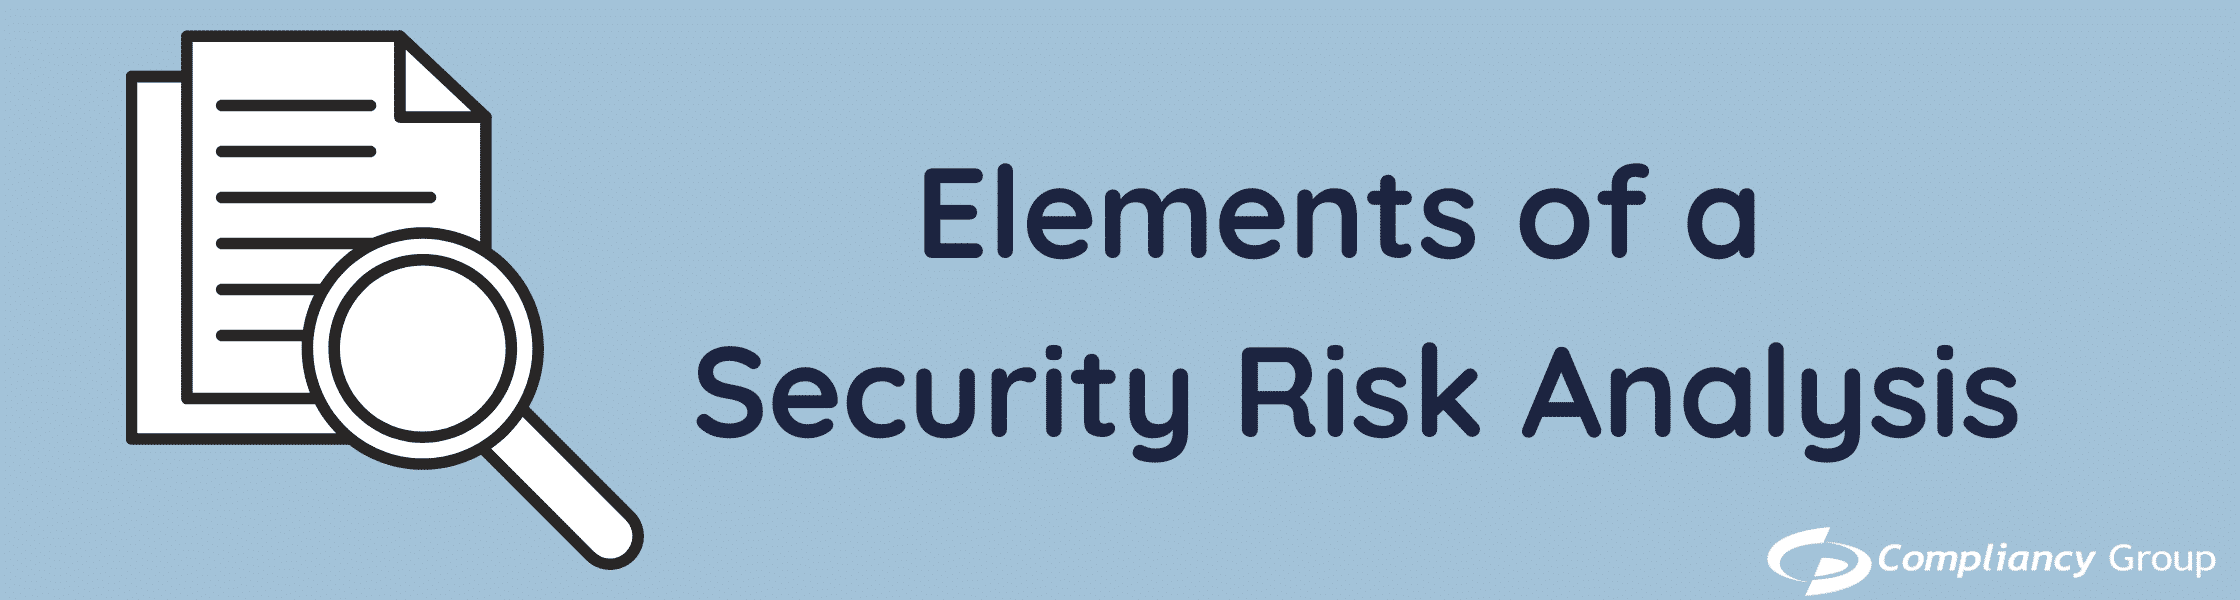 Elements of a Security Risk Analysis